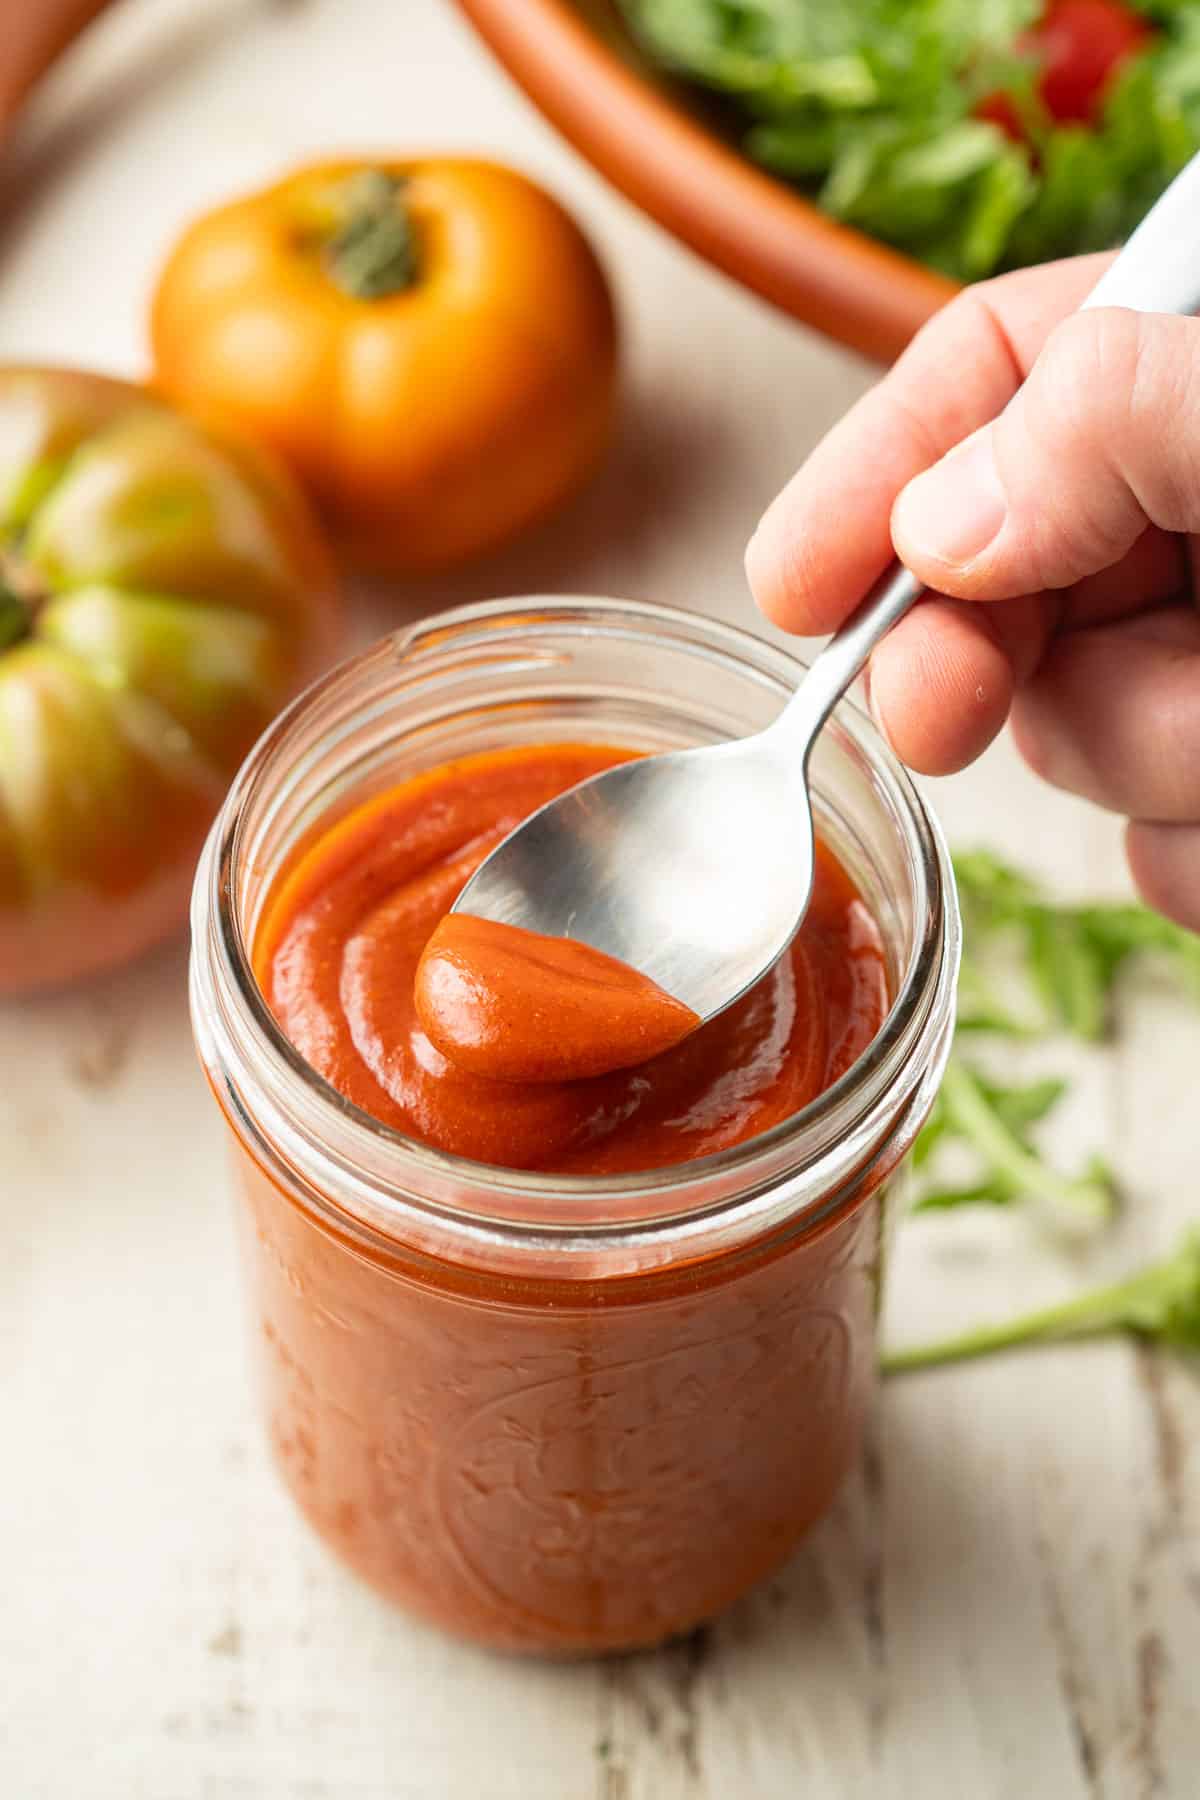 Hand dipping a spoon into a jar of Vegan French Dressing.